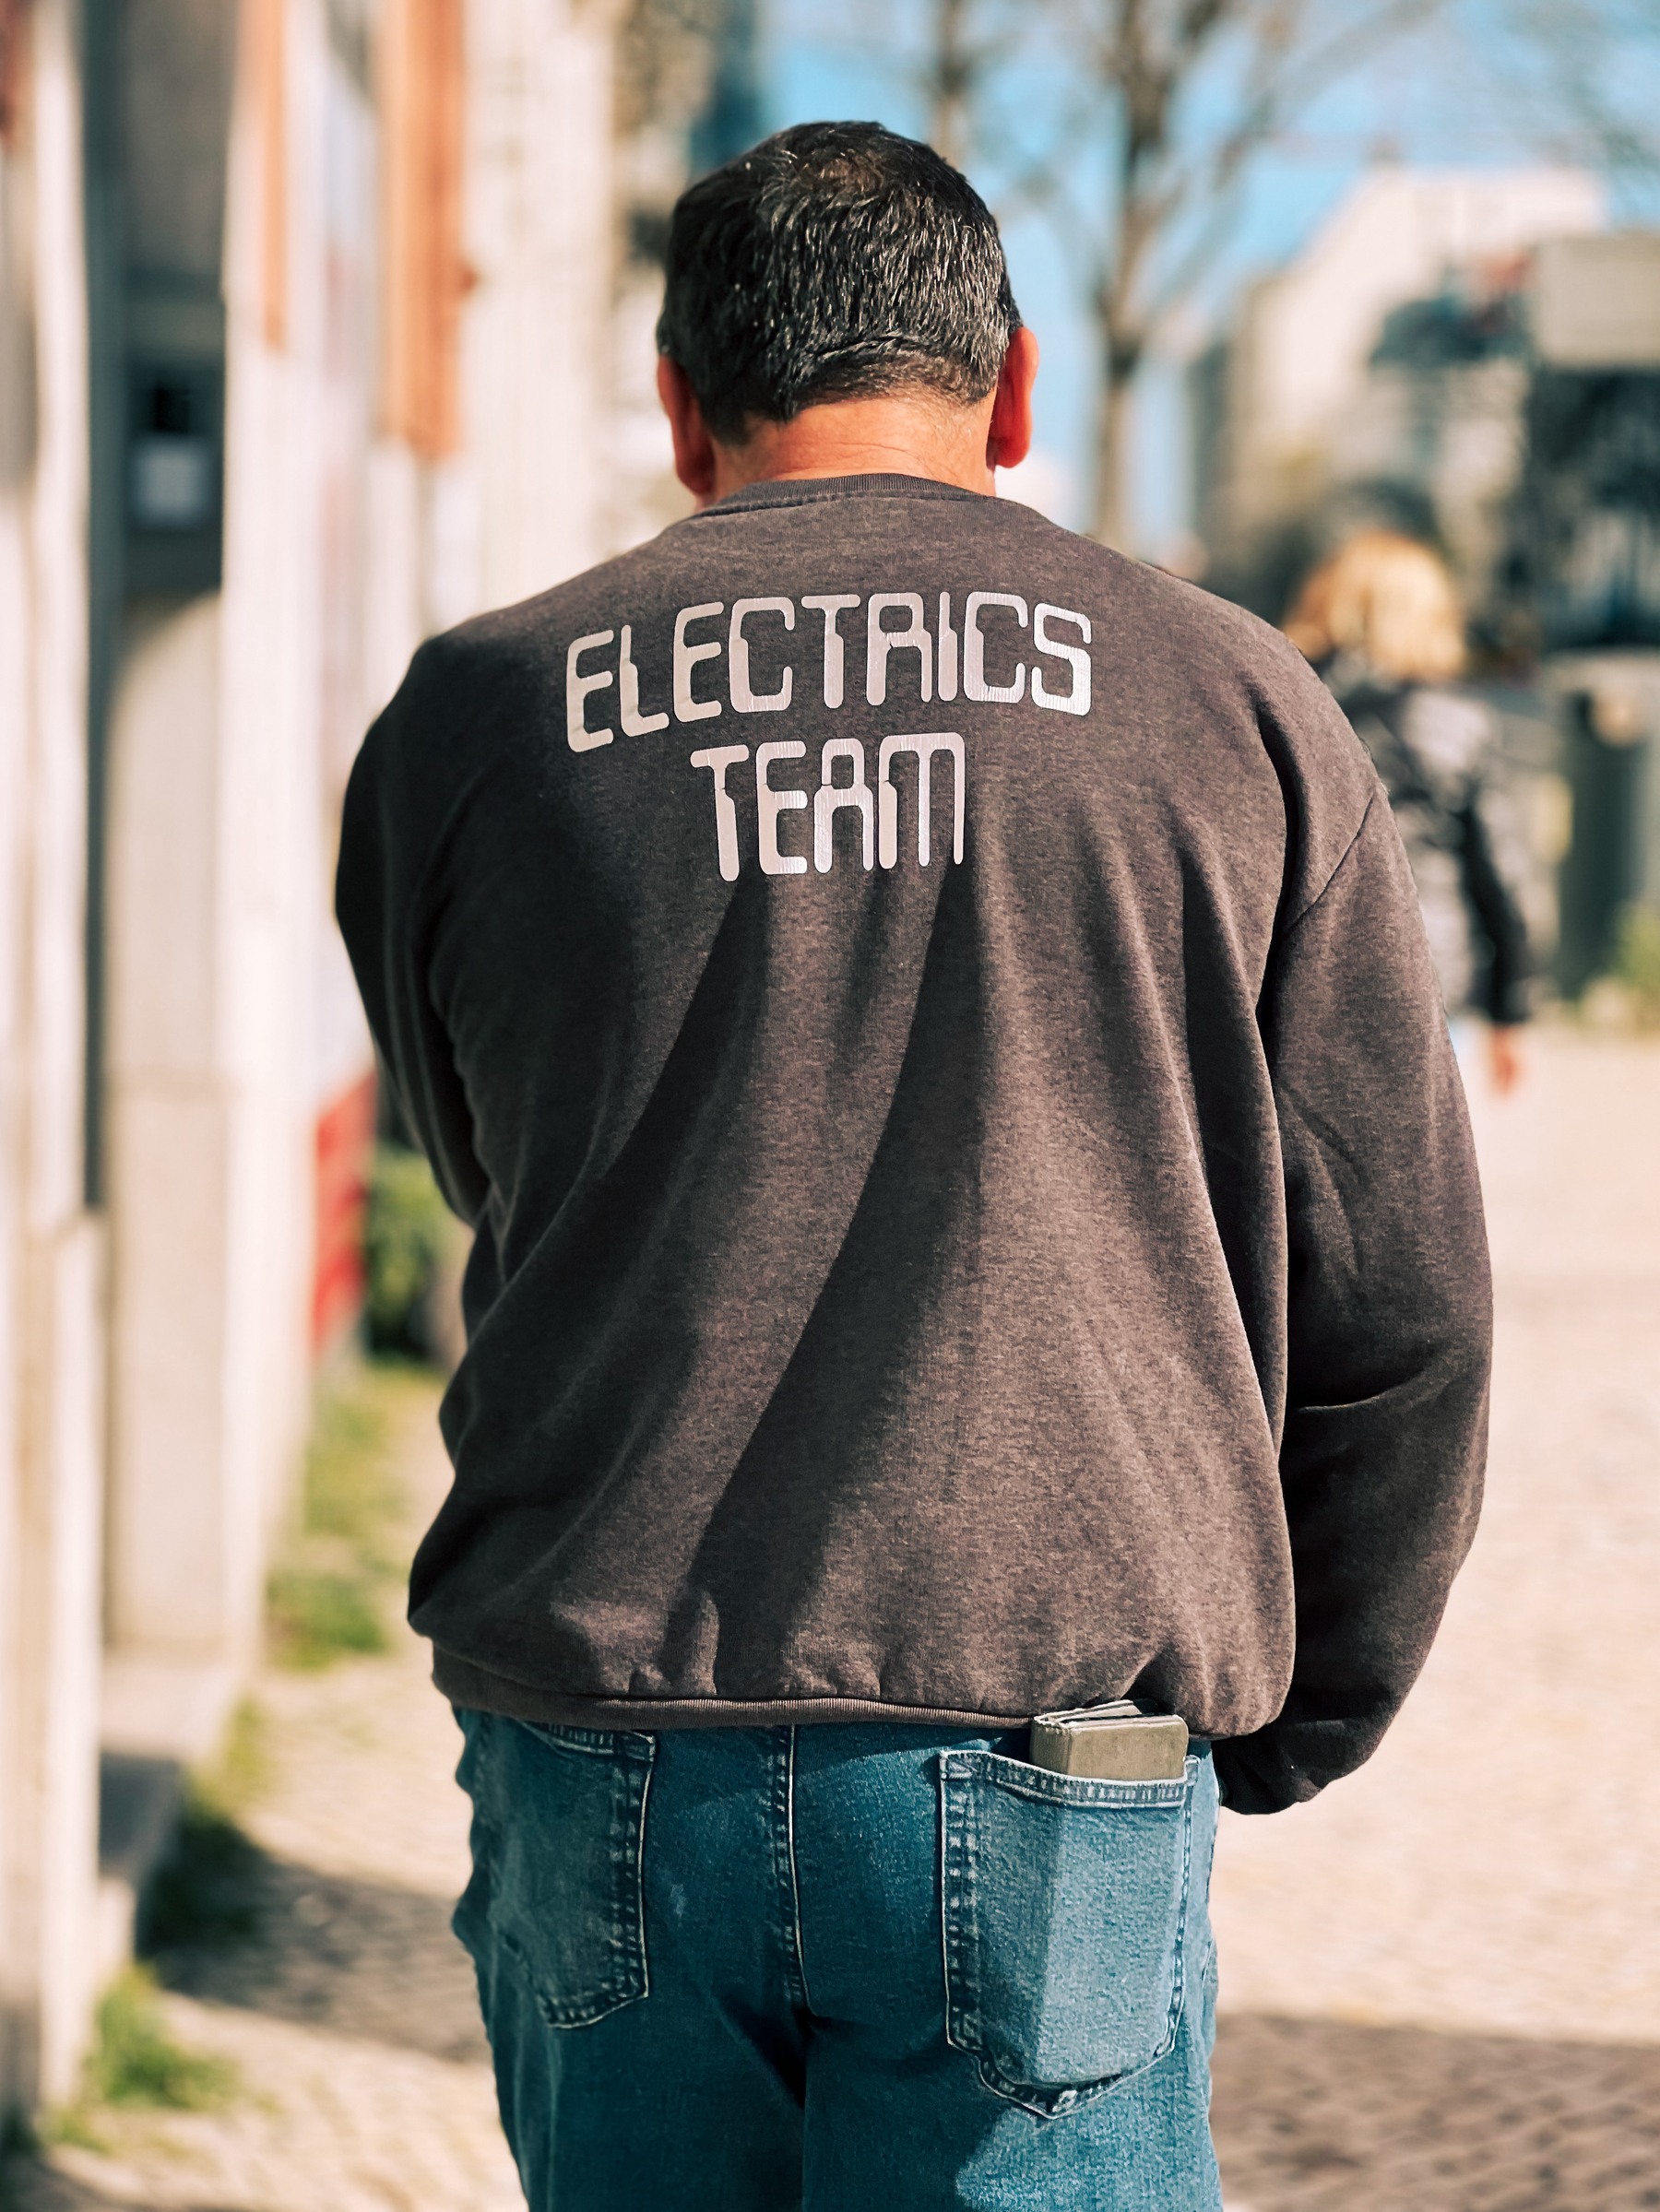 A man standing outdoors wearing jeans and a sweatshirt with the text &ldquo;ELECTRICS TEAM&rdquo; on the back.